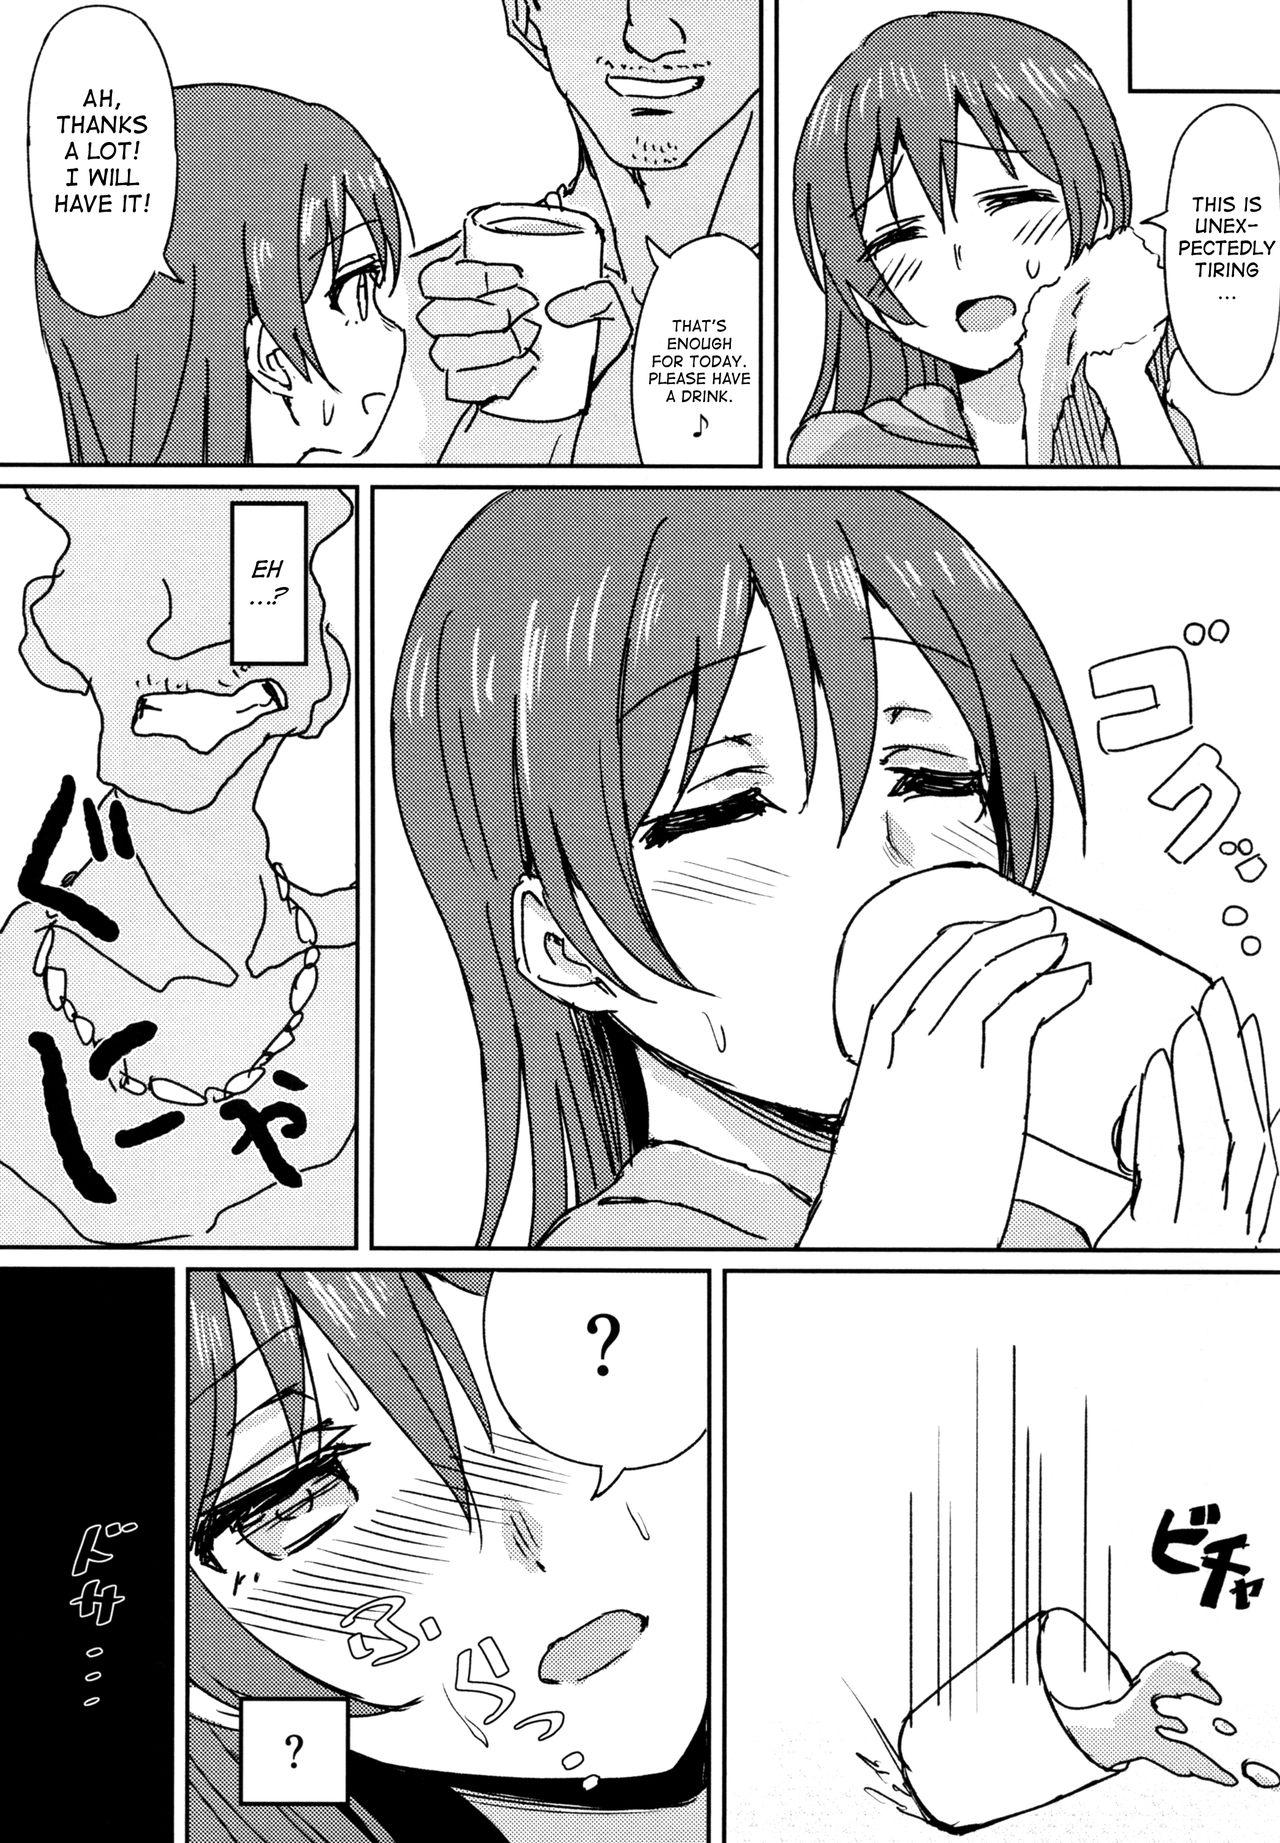 Hymen Hah,Wrench This! - Love live Camera - Page 9